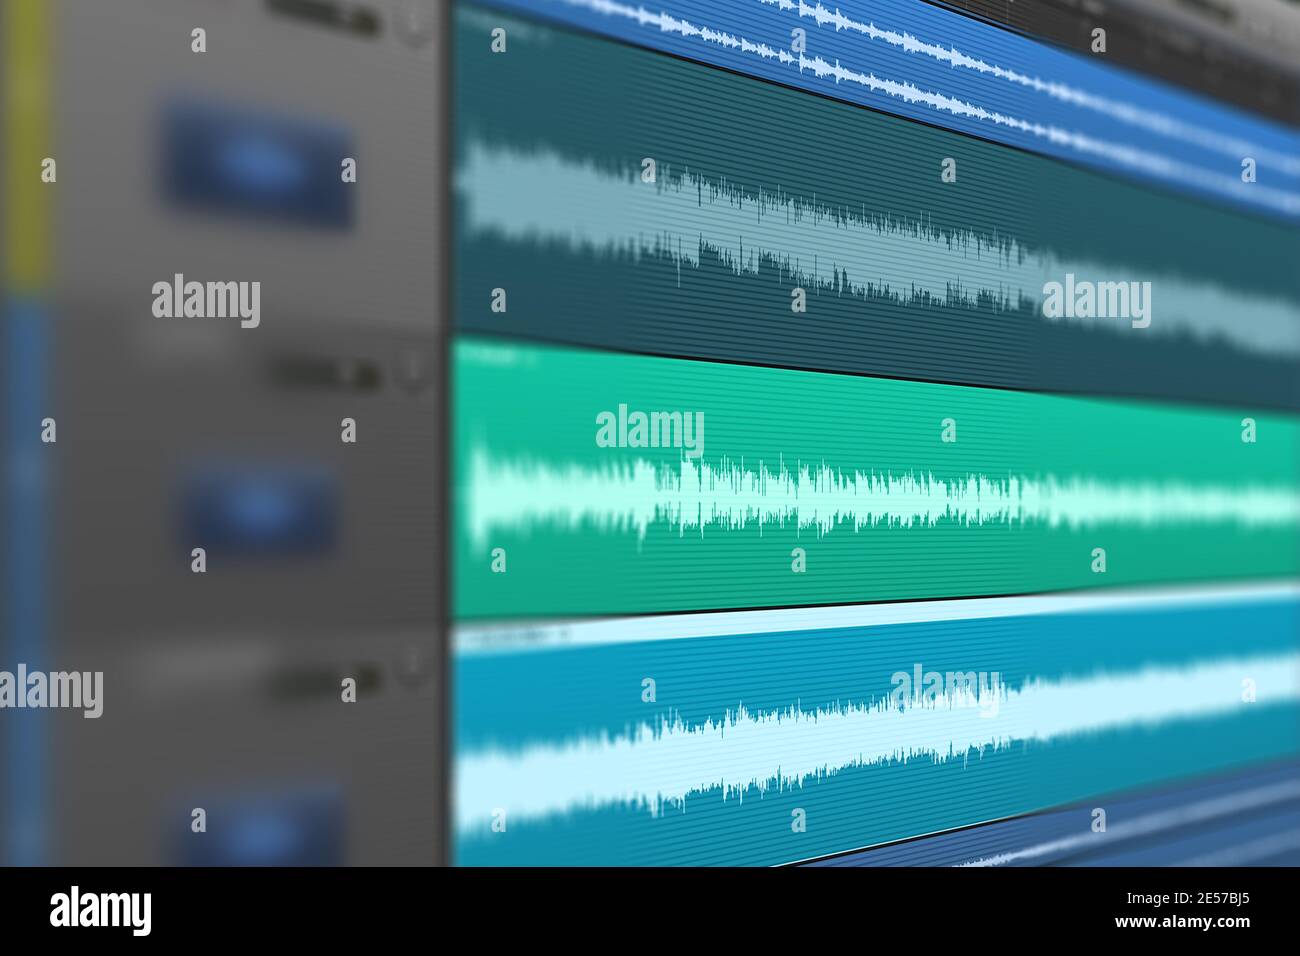 Image of multitrack sound audio wave on monitor. Recording, Mixing, and mastering in studio. Stock Photo